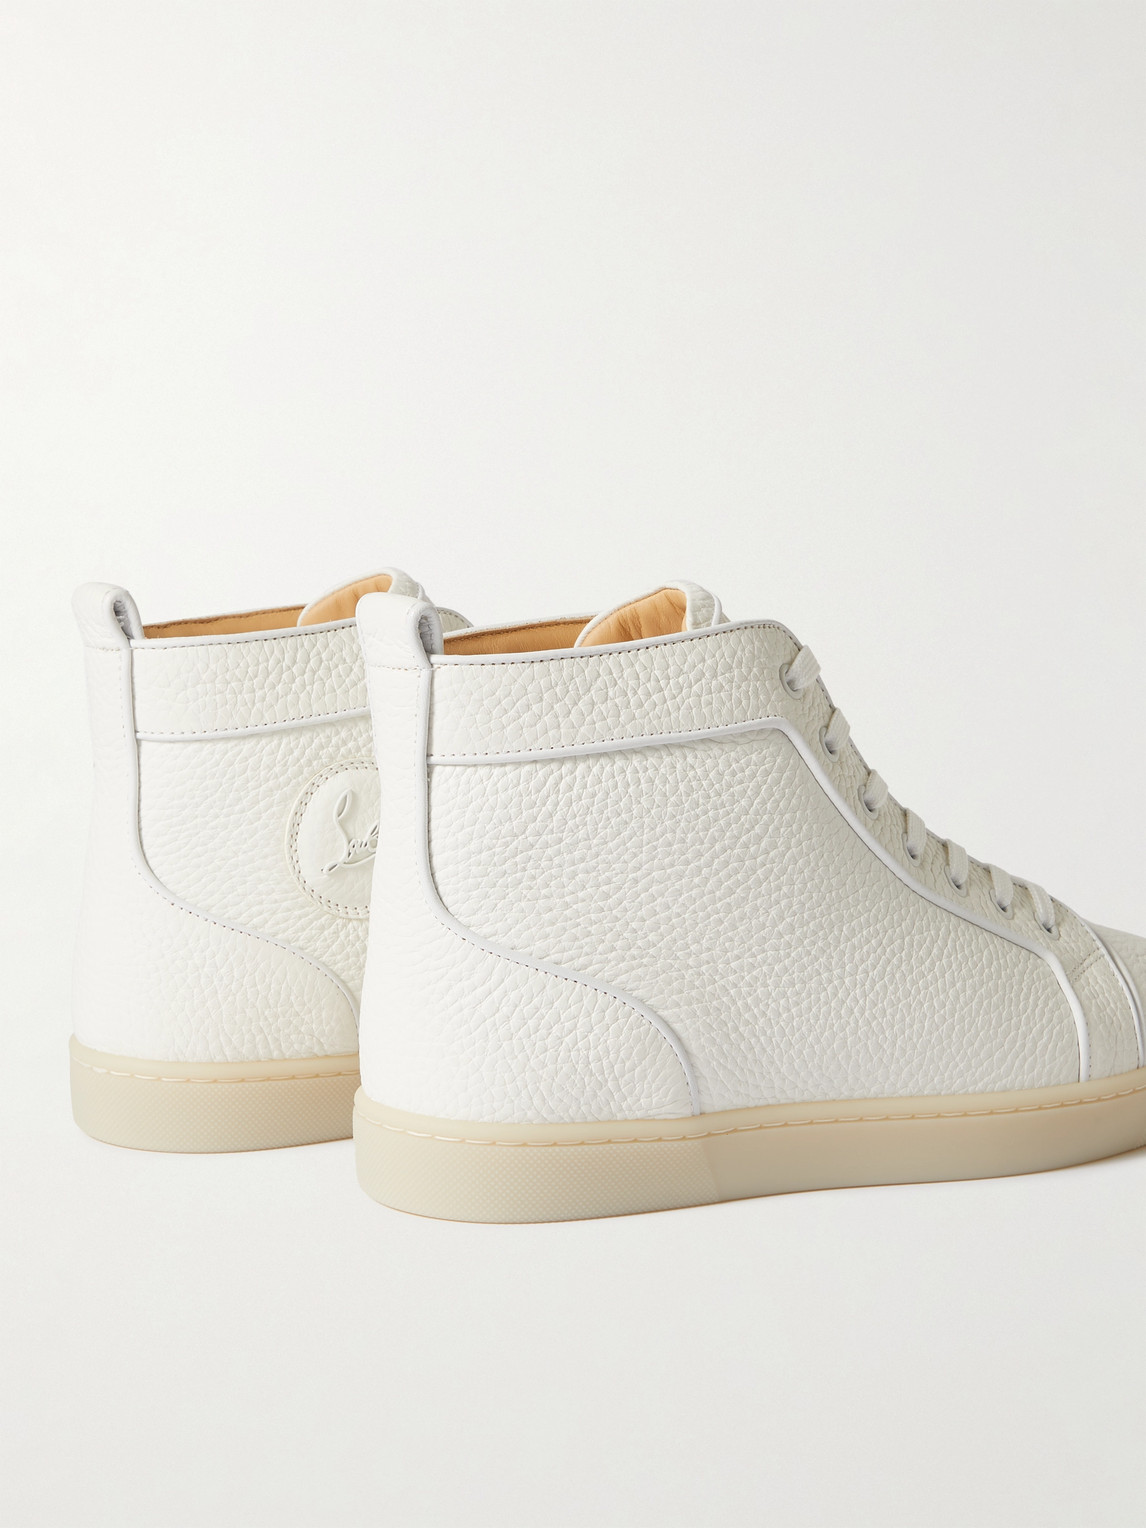 Shop Christian Louboutin Louis Orlato Full-grain Leather High-top Sneakers In White